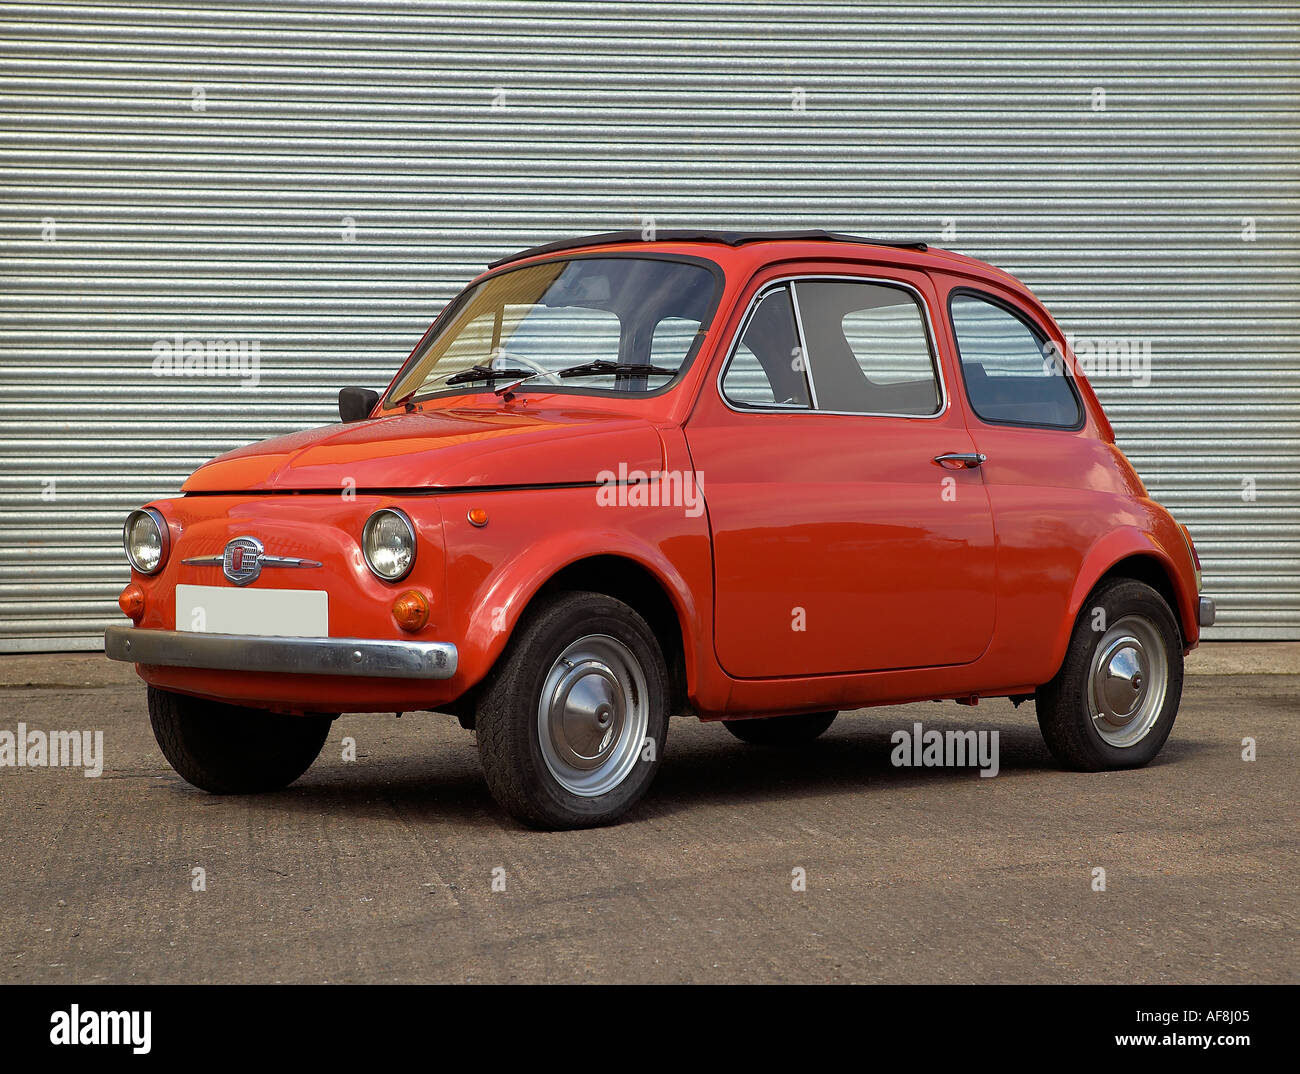 Fiat's heritage division has restomodded a 500 from the Seventies